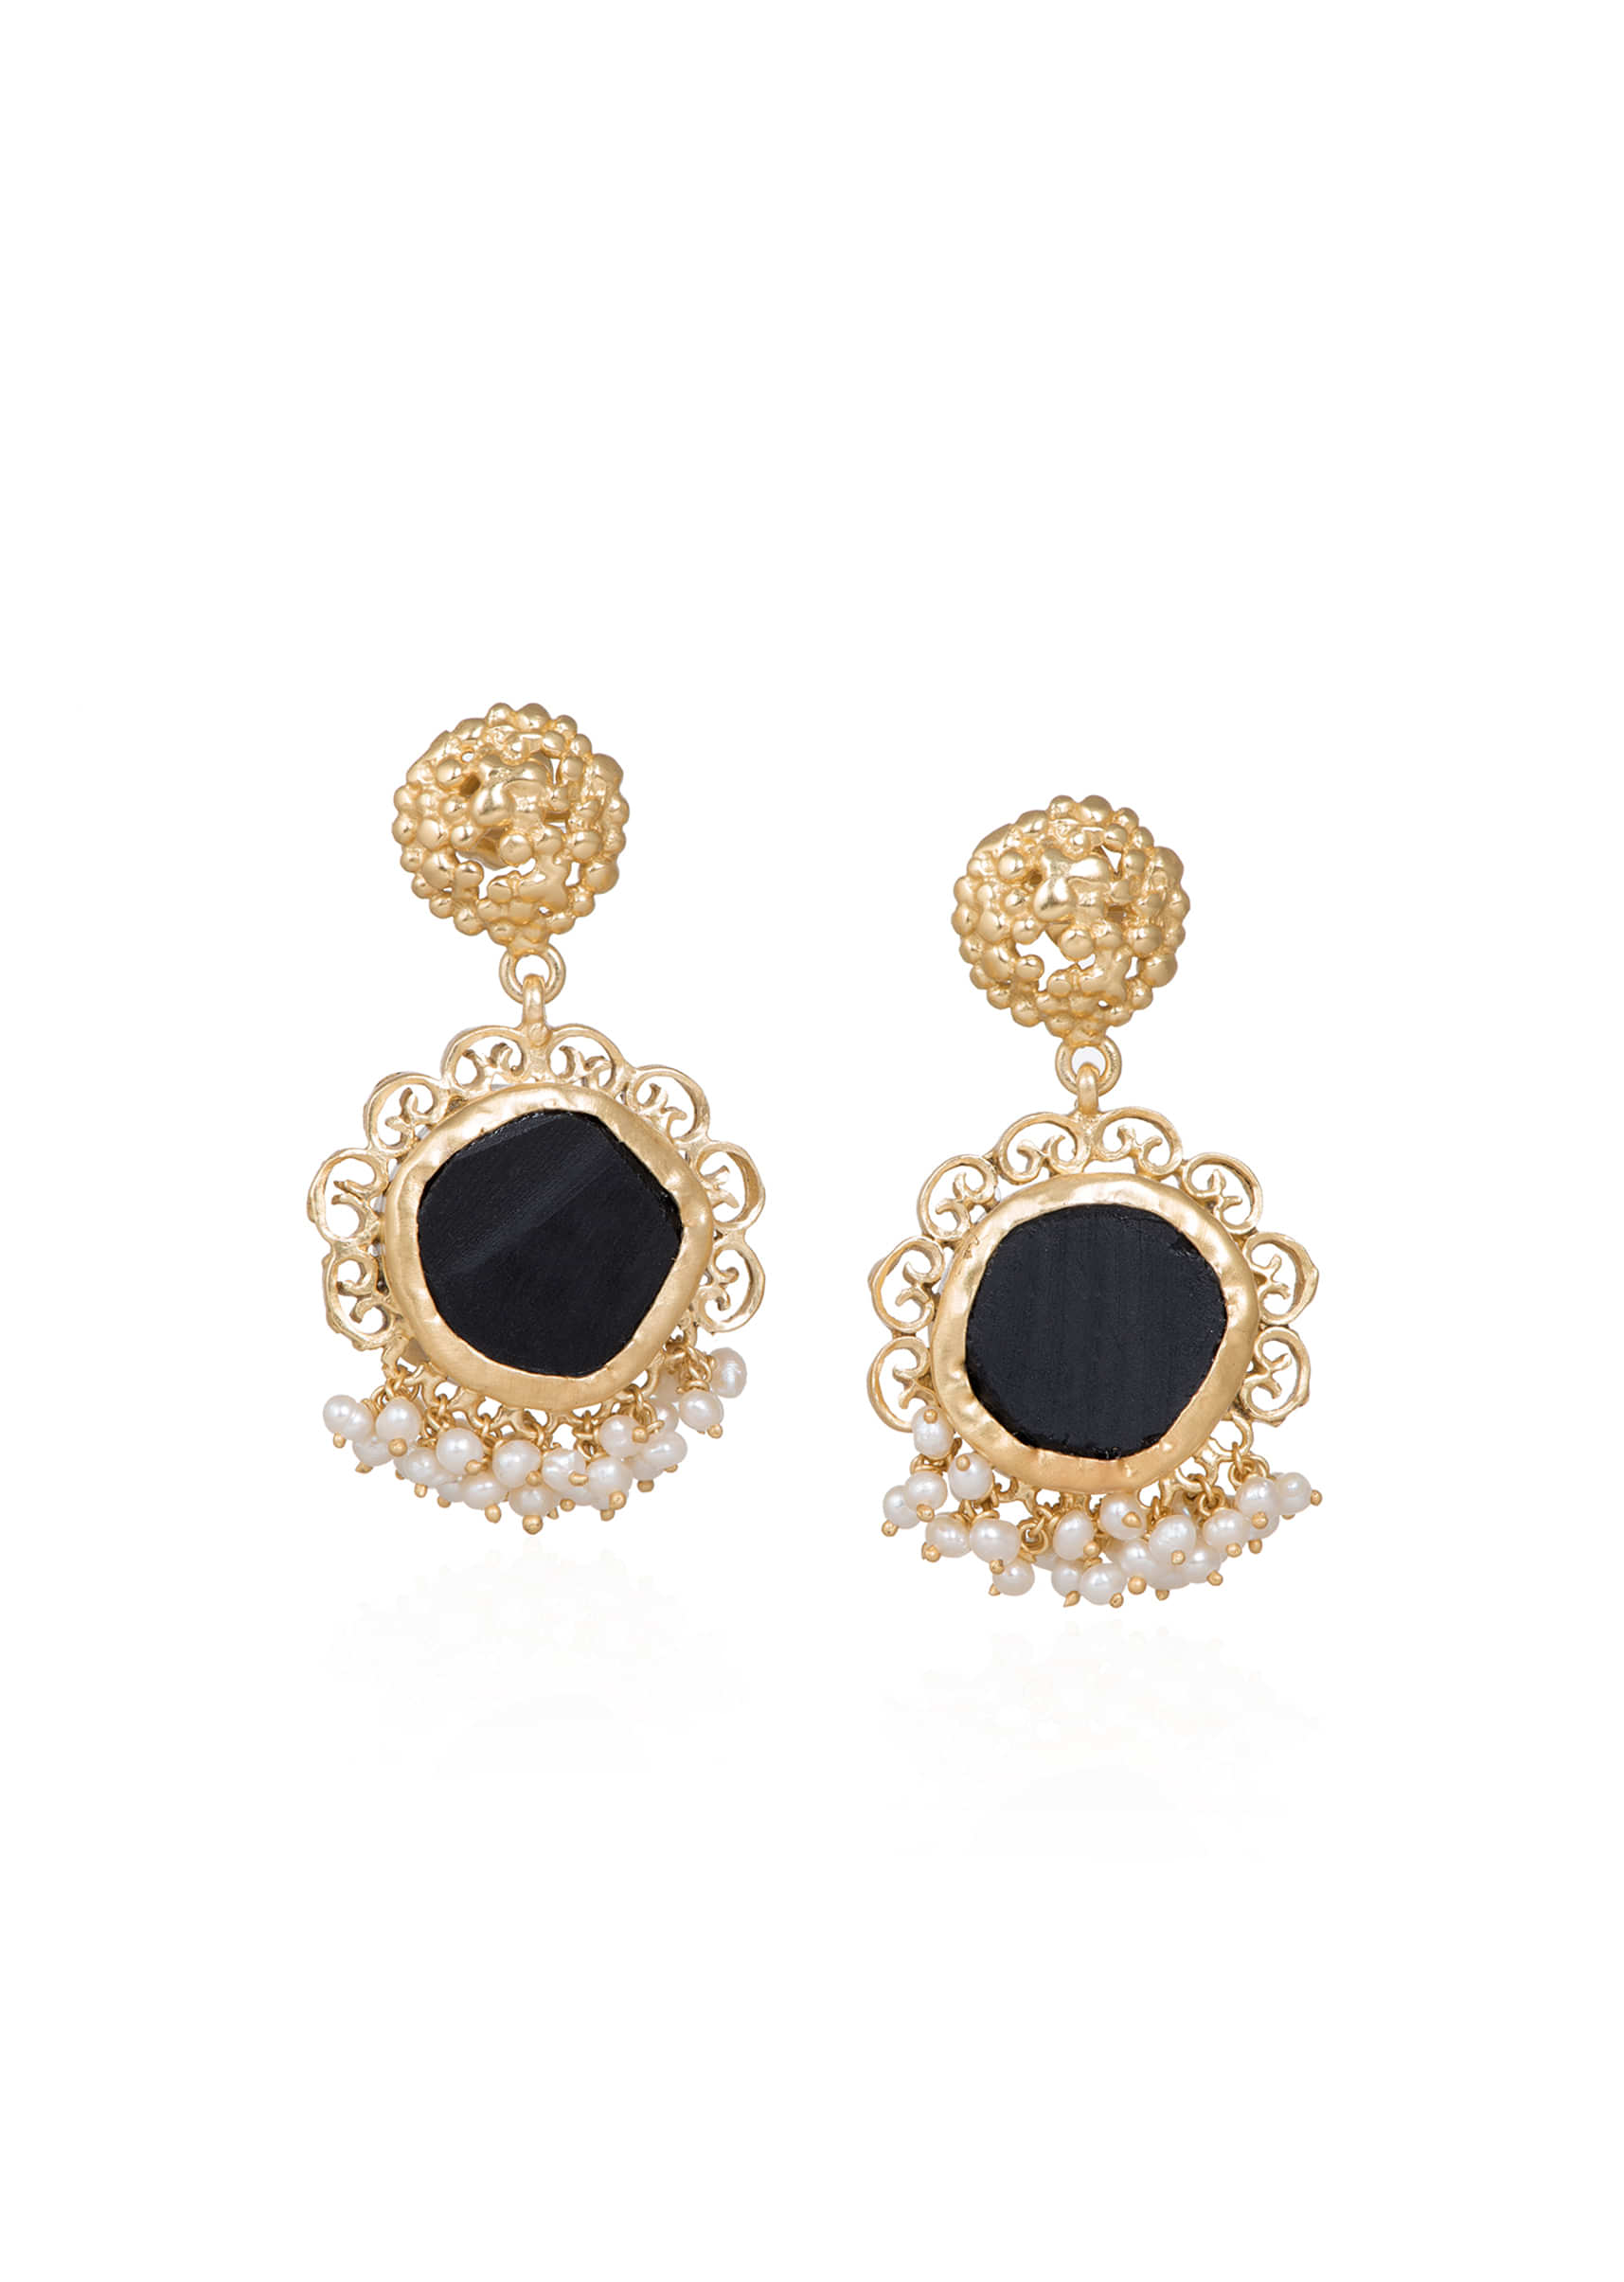 Gold Plated Earrings With Black Onyx And Tiny Bits Of Pearls By Zariin